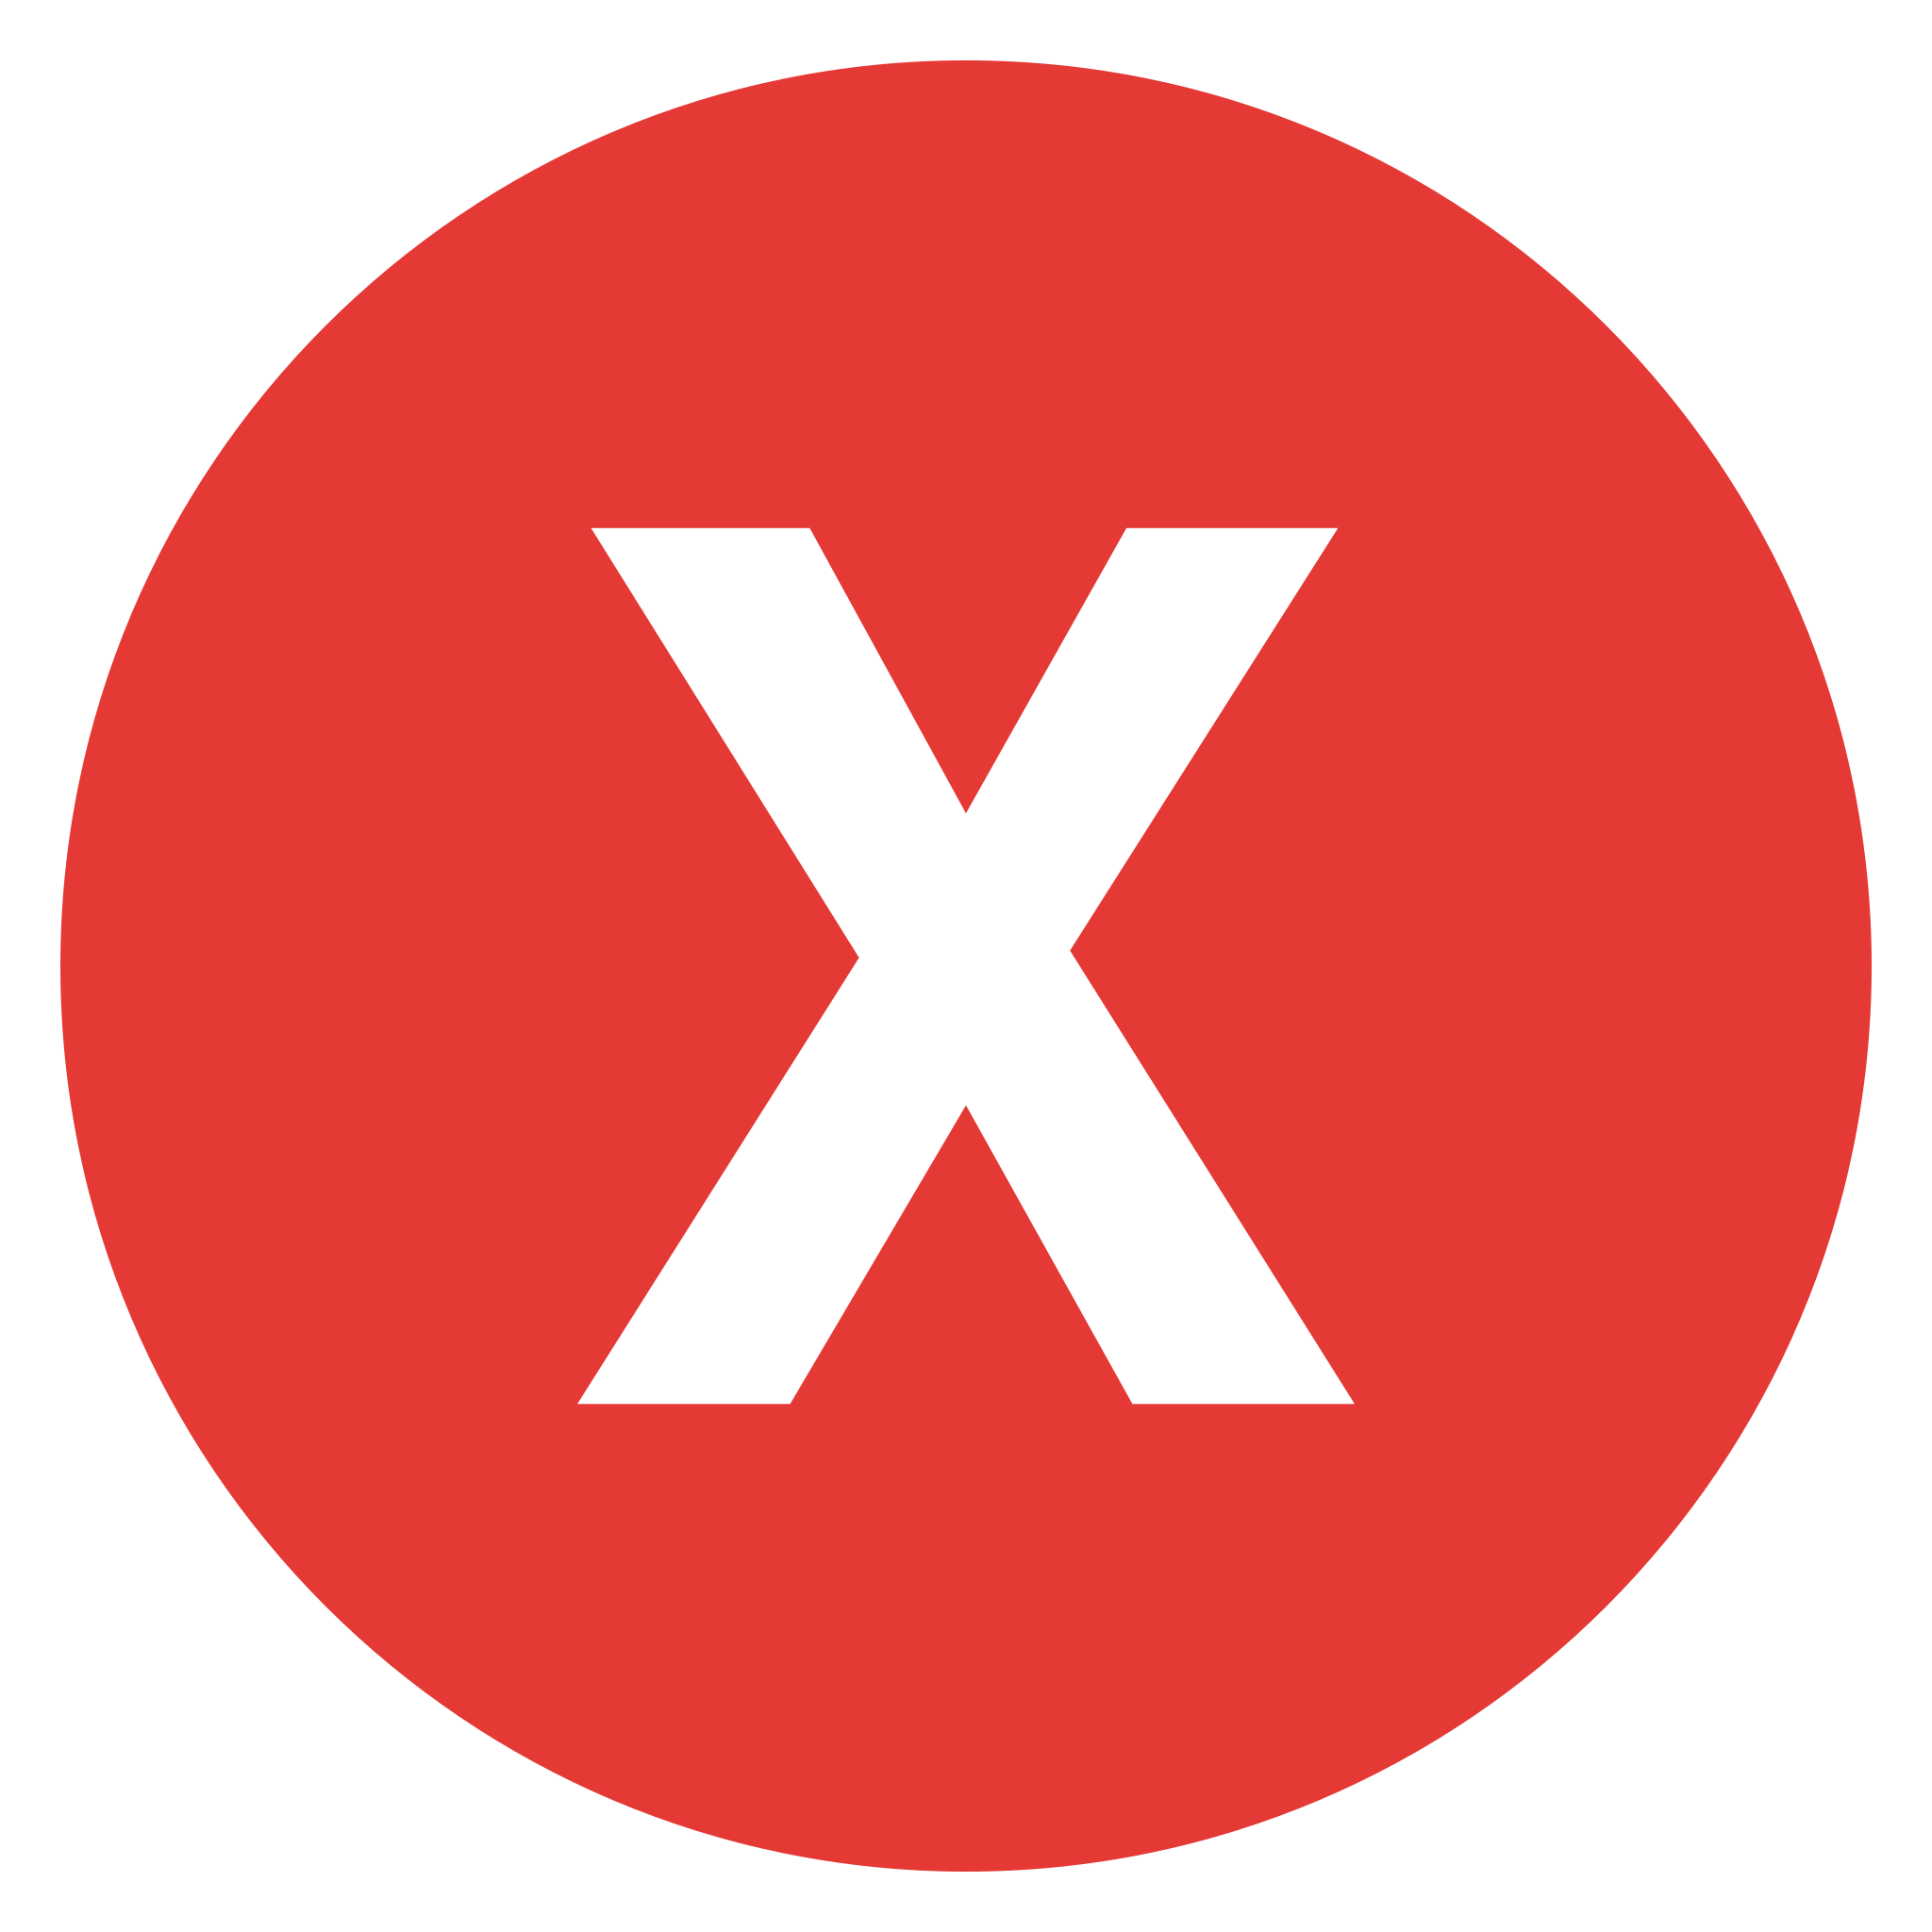 Shortcut icon with a red X symbol